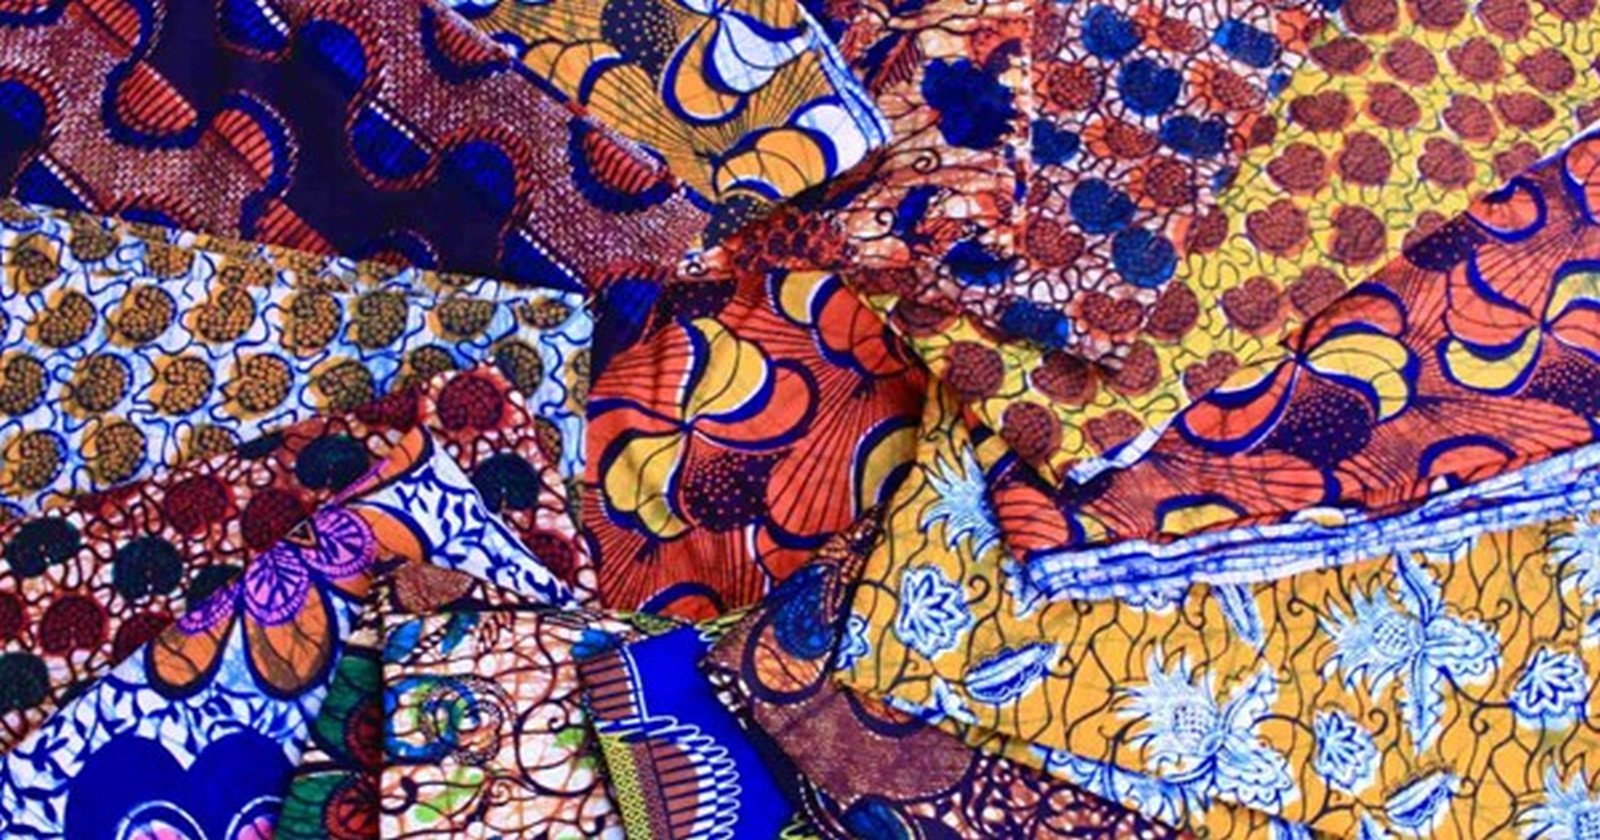 Inside the World of Textiles: African Textile Design - Sheet3